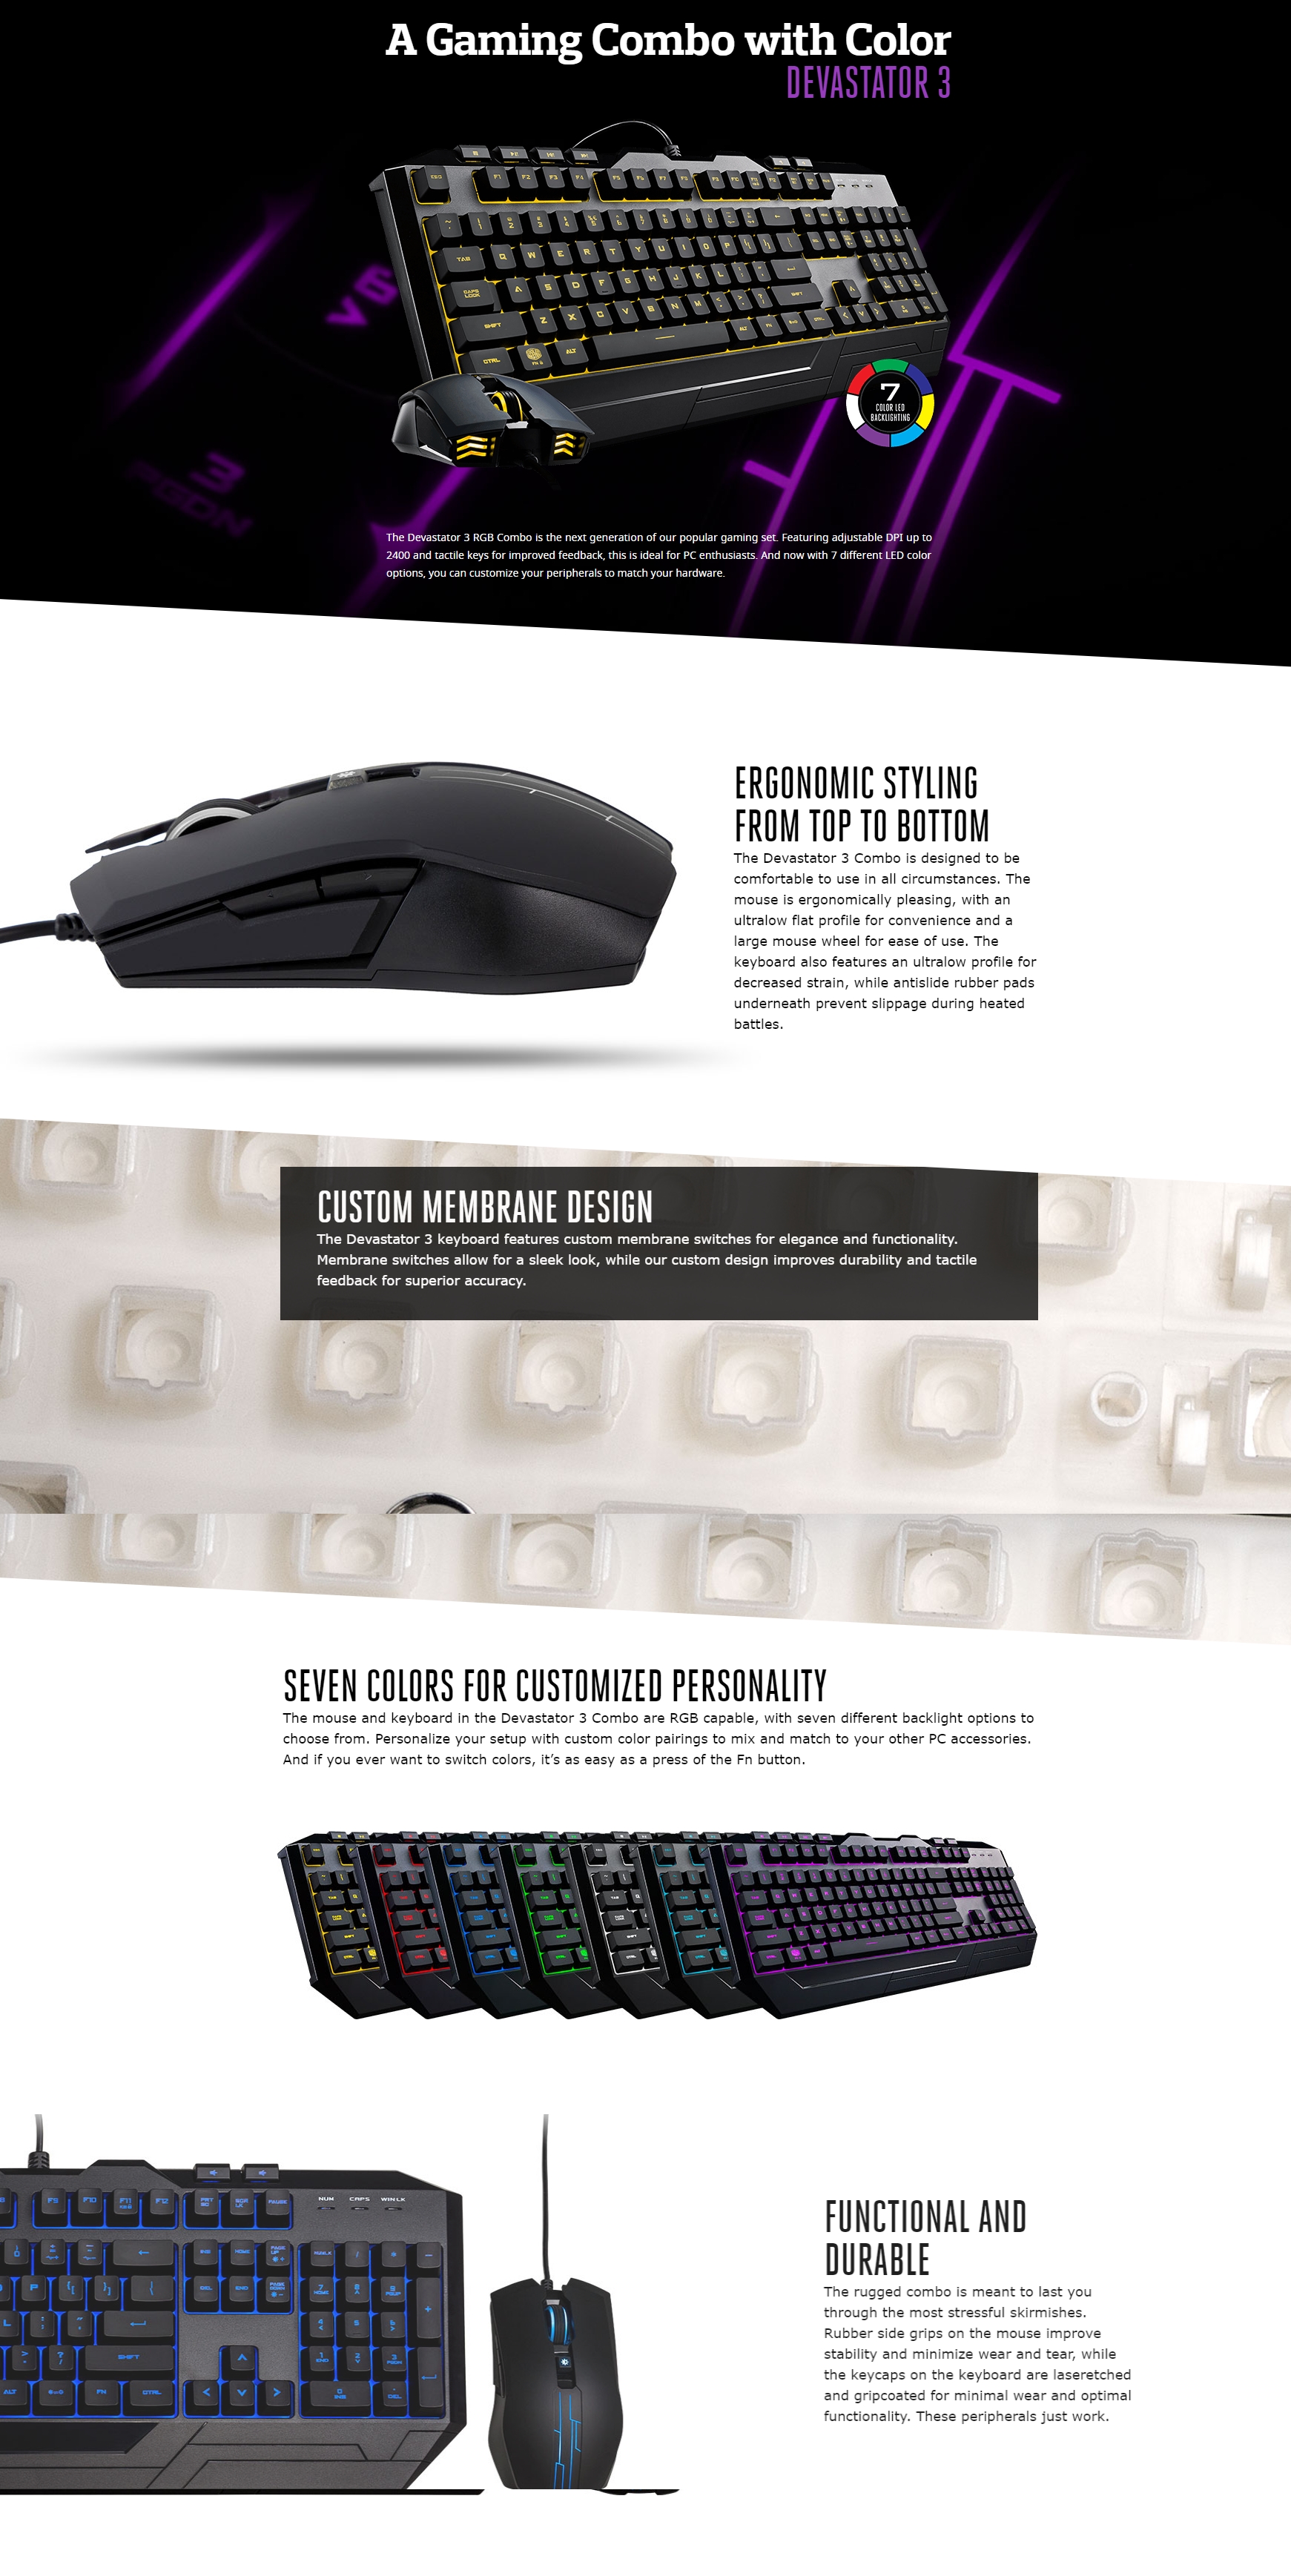 A large marketing image providing additional information about the product Cooler Master Devastator 3 RGB Keyboard and Mouse Combo - Additional alt info not provided